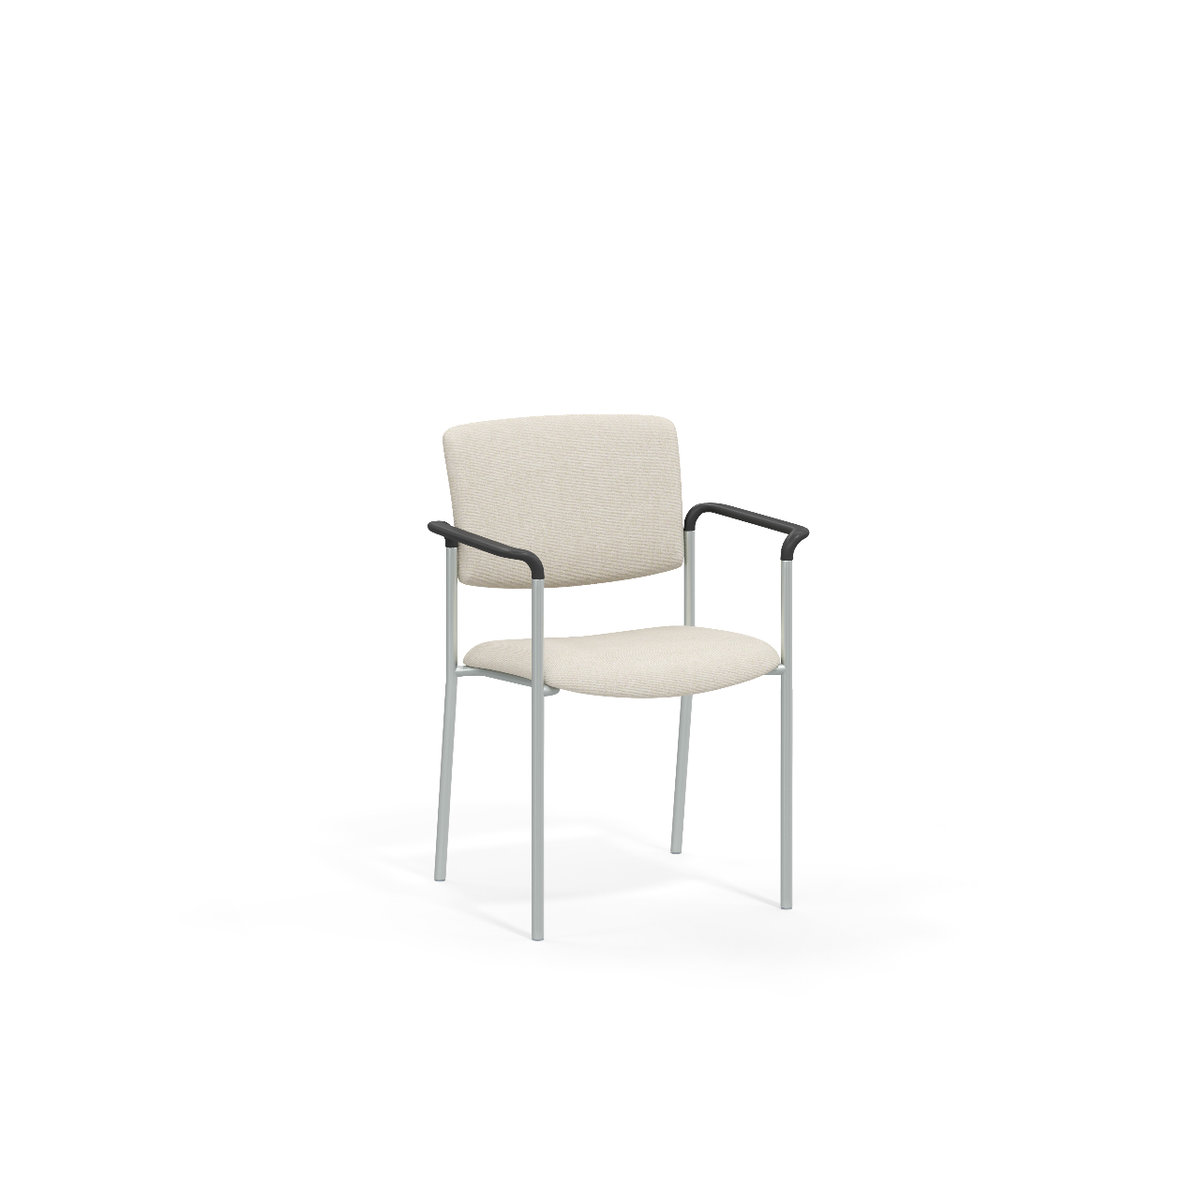 18.5” Stacking Chair, arms Photo